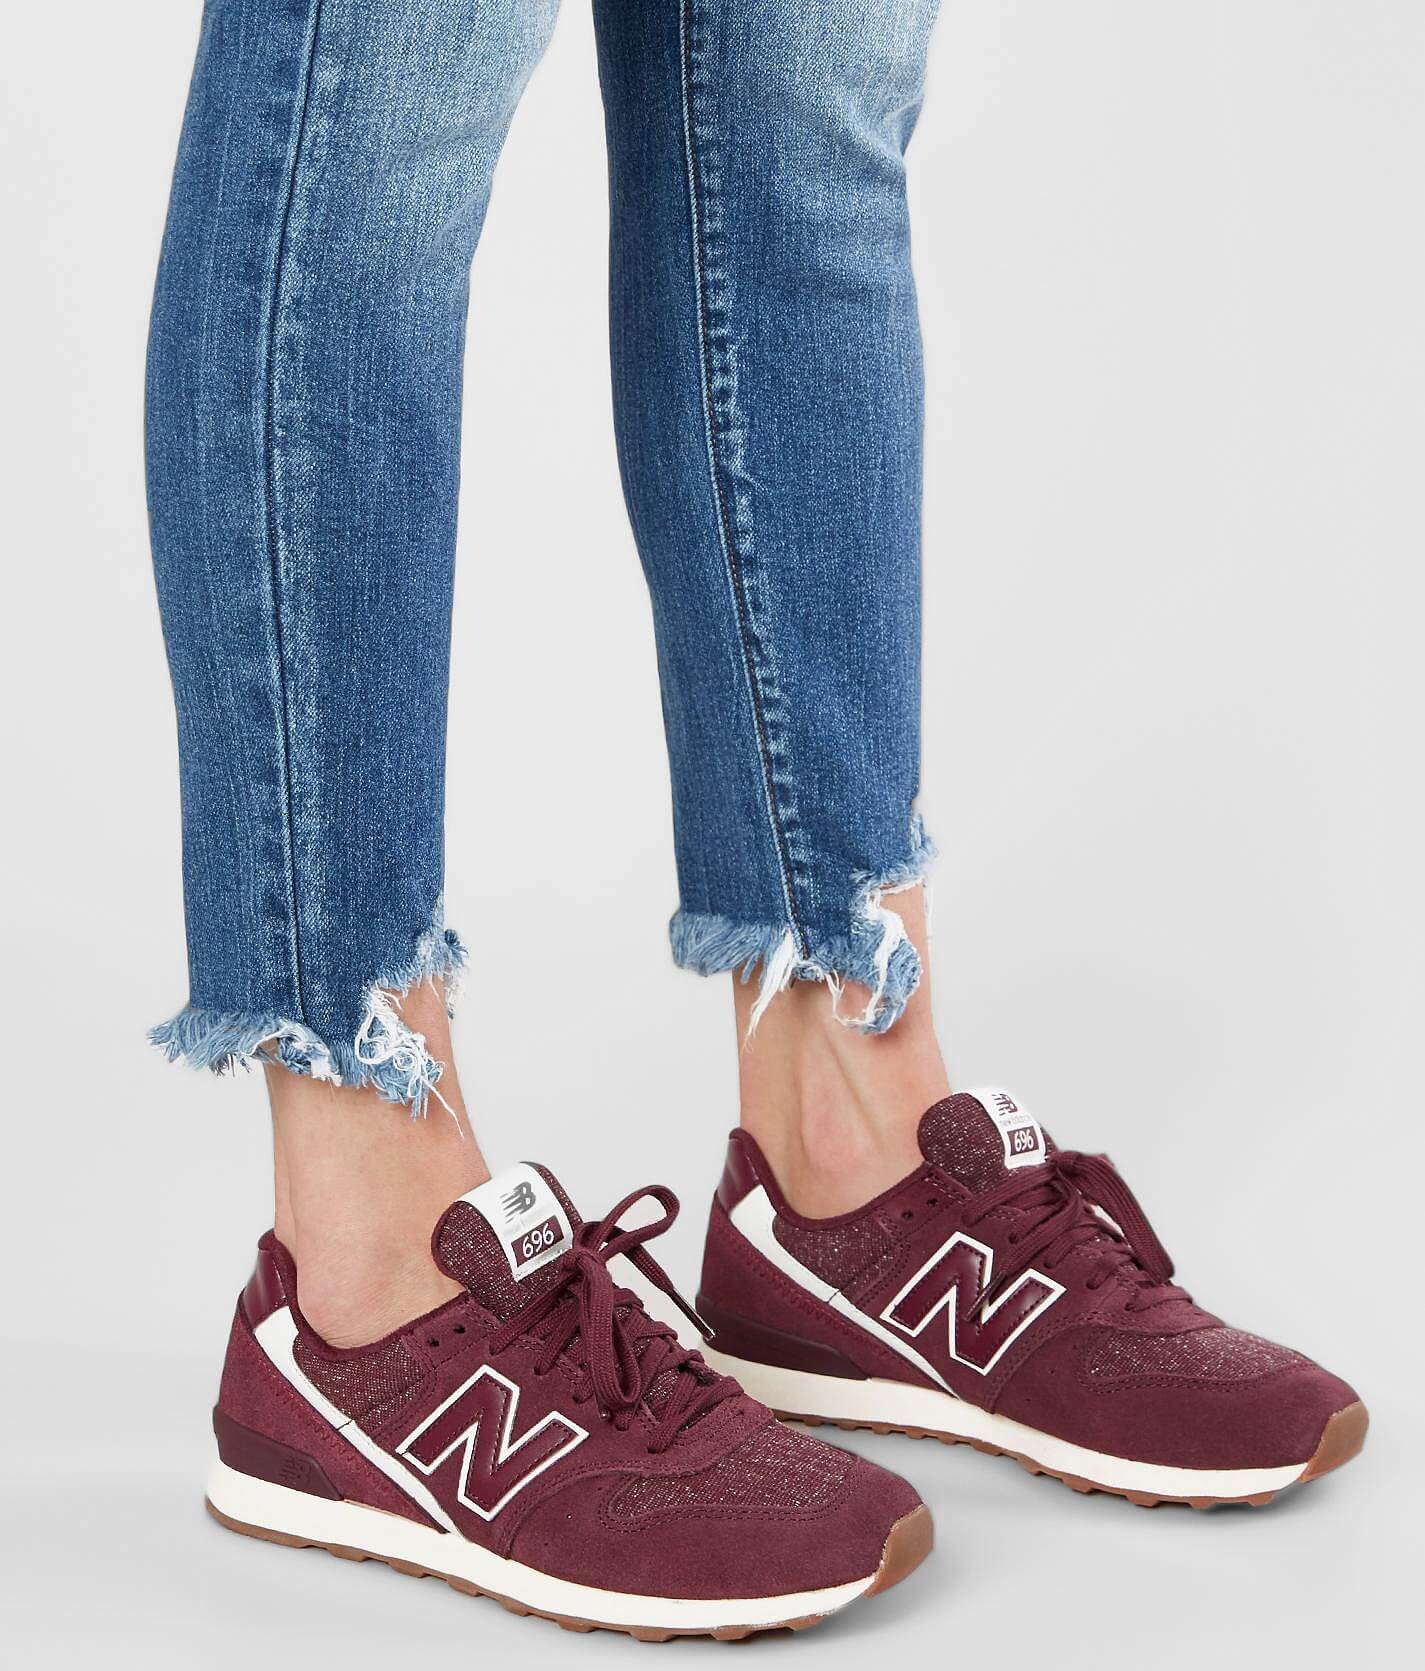 new balance women's suede 696 shoes